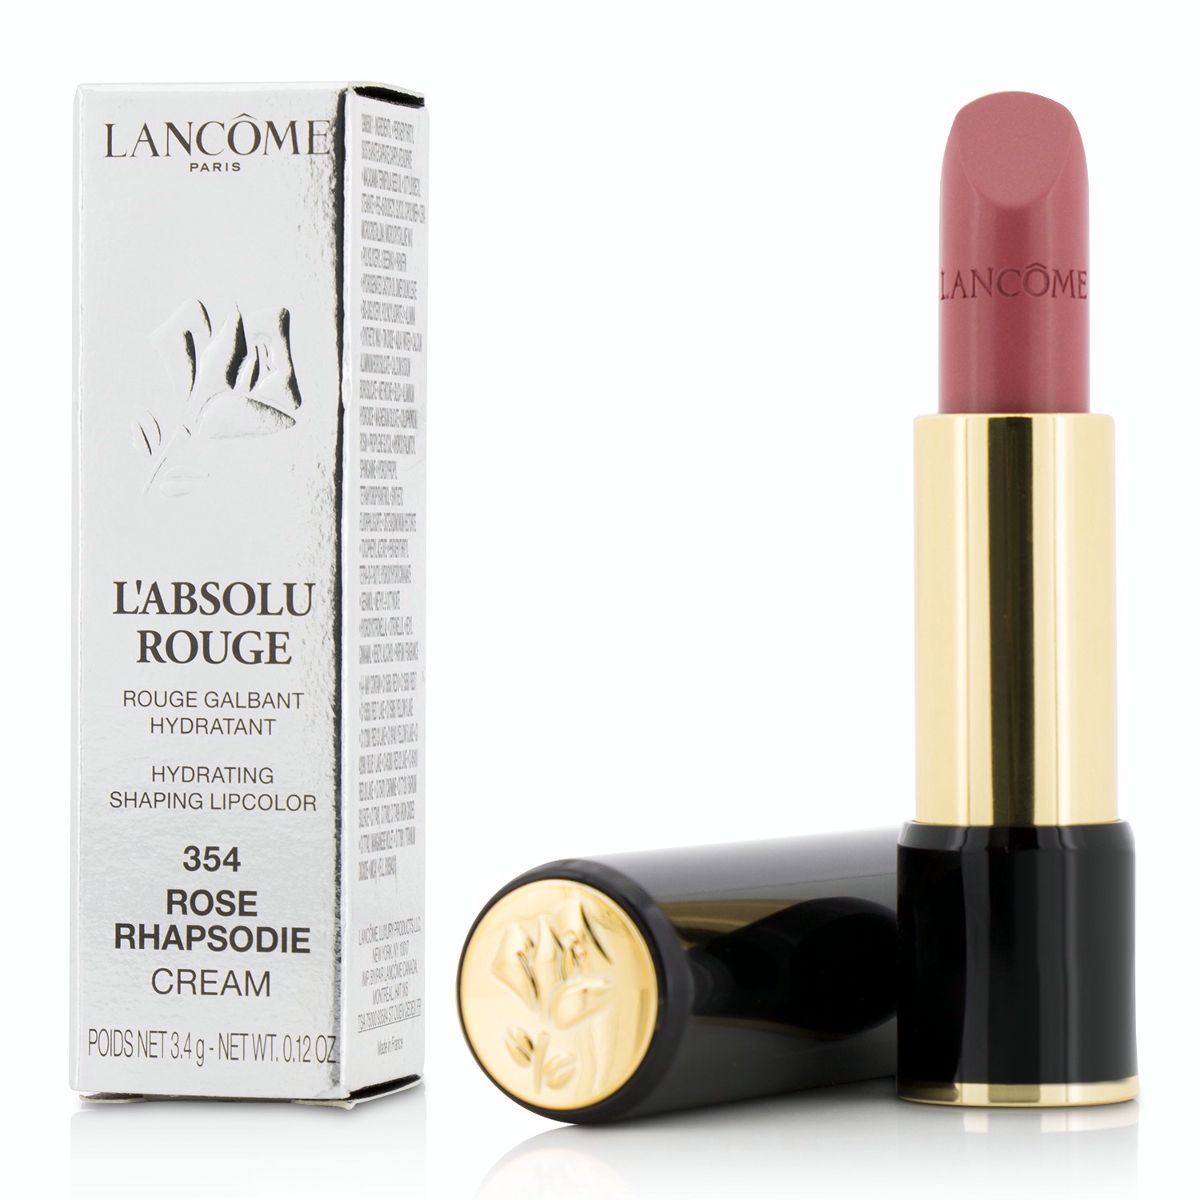 L Absolu Rouge Hydrating Shaping Lipcolor - # 354 Rose Rhapsodie (Cream) Lancome Image